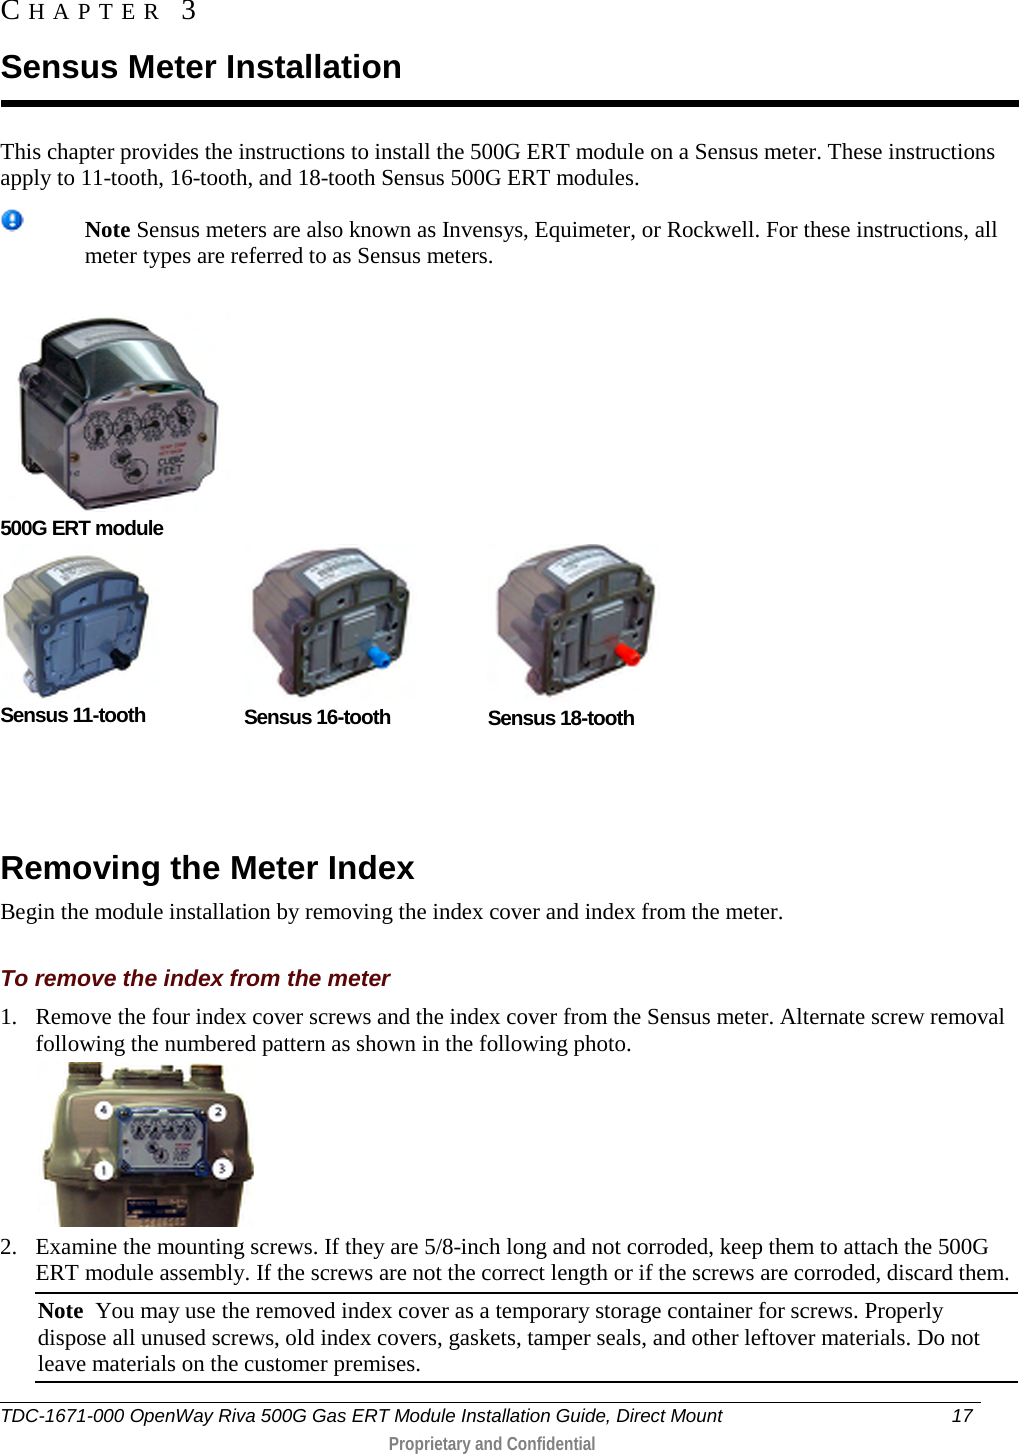  This chapter provides the instructions to install the 500G ERT module on a Sensus meter. These instructions apply to 11-tooth, 16-tooth, and 18-tooth Sensus 500G ERT modules.   Note Sensus meters are also known as Invensys, Equimeter, or Rockwell. For these instructions, all meter types are referred to as Sensus meters.      500G ERT module  Sensus 11-tooth  Sensus 16-tooth  Sensus 18-tooth                      Removing the Meter Index Begin the module installation by removing the index cover and index from the meter.  To remove the index from the meter 1. Remove the four index cover screws and the index cover from the Sensus meter. Alternate screw removal following the numbered pattern as shown in the following photo.  2. Examine the mounting screws. If they are 5/8-inch long and not corroded, keep them to attach the 500G ERT module assembly. If the screws are not the correct length or if the screws are corroded, discard them.  Note  You may use the removed index cover as a temporary storage container for screws. Properly dispose all unused screws, old index covers, gaskets, tamper seals, and other leftover materials. Do not leave materials on the customer premises.  CHAPTER  3  Sensus Meter Installation TDC-1671-000 OpenWay Riva 500G Gas ERT Module Installation Guide, Direct Mount 17   Proprietary and Confidential  